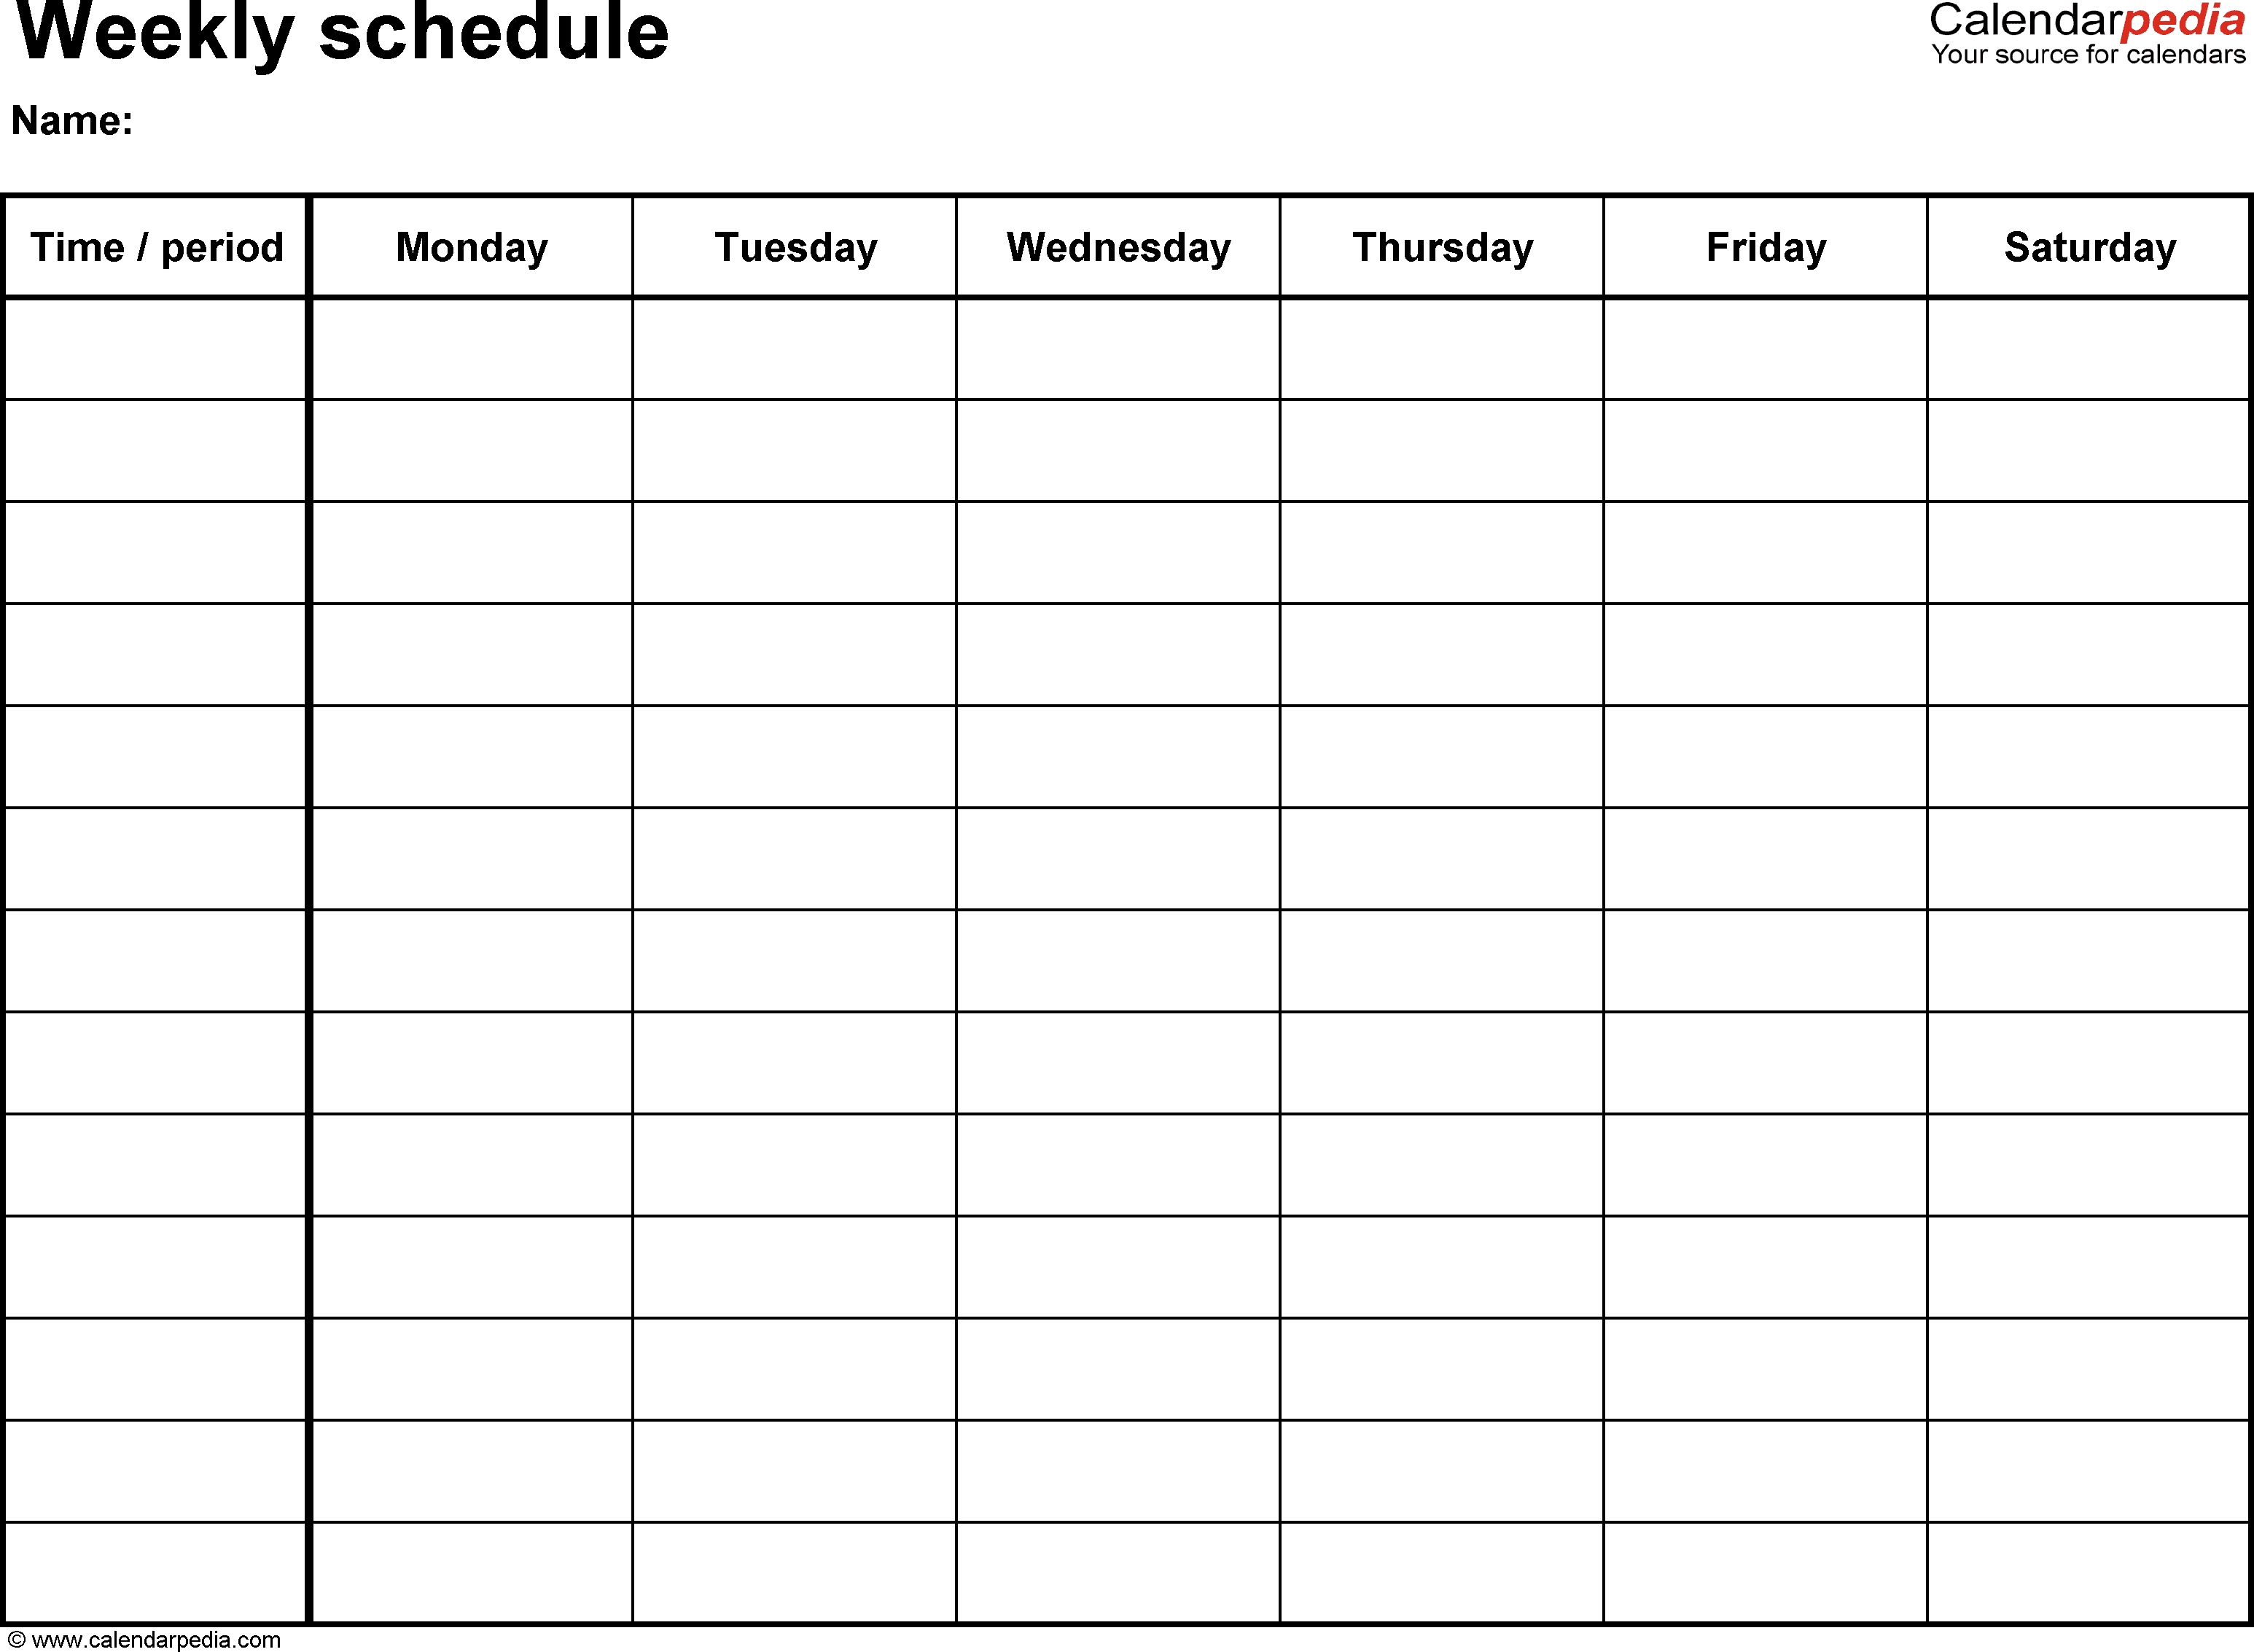 Free Weekly Schedule Templates For Word - 18 Templates-Monday Friday Calendar Template